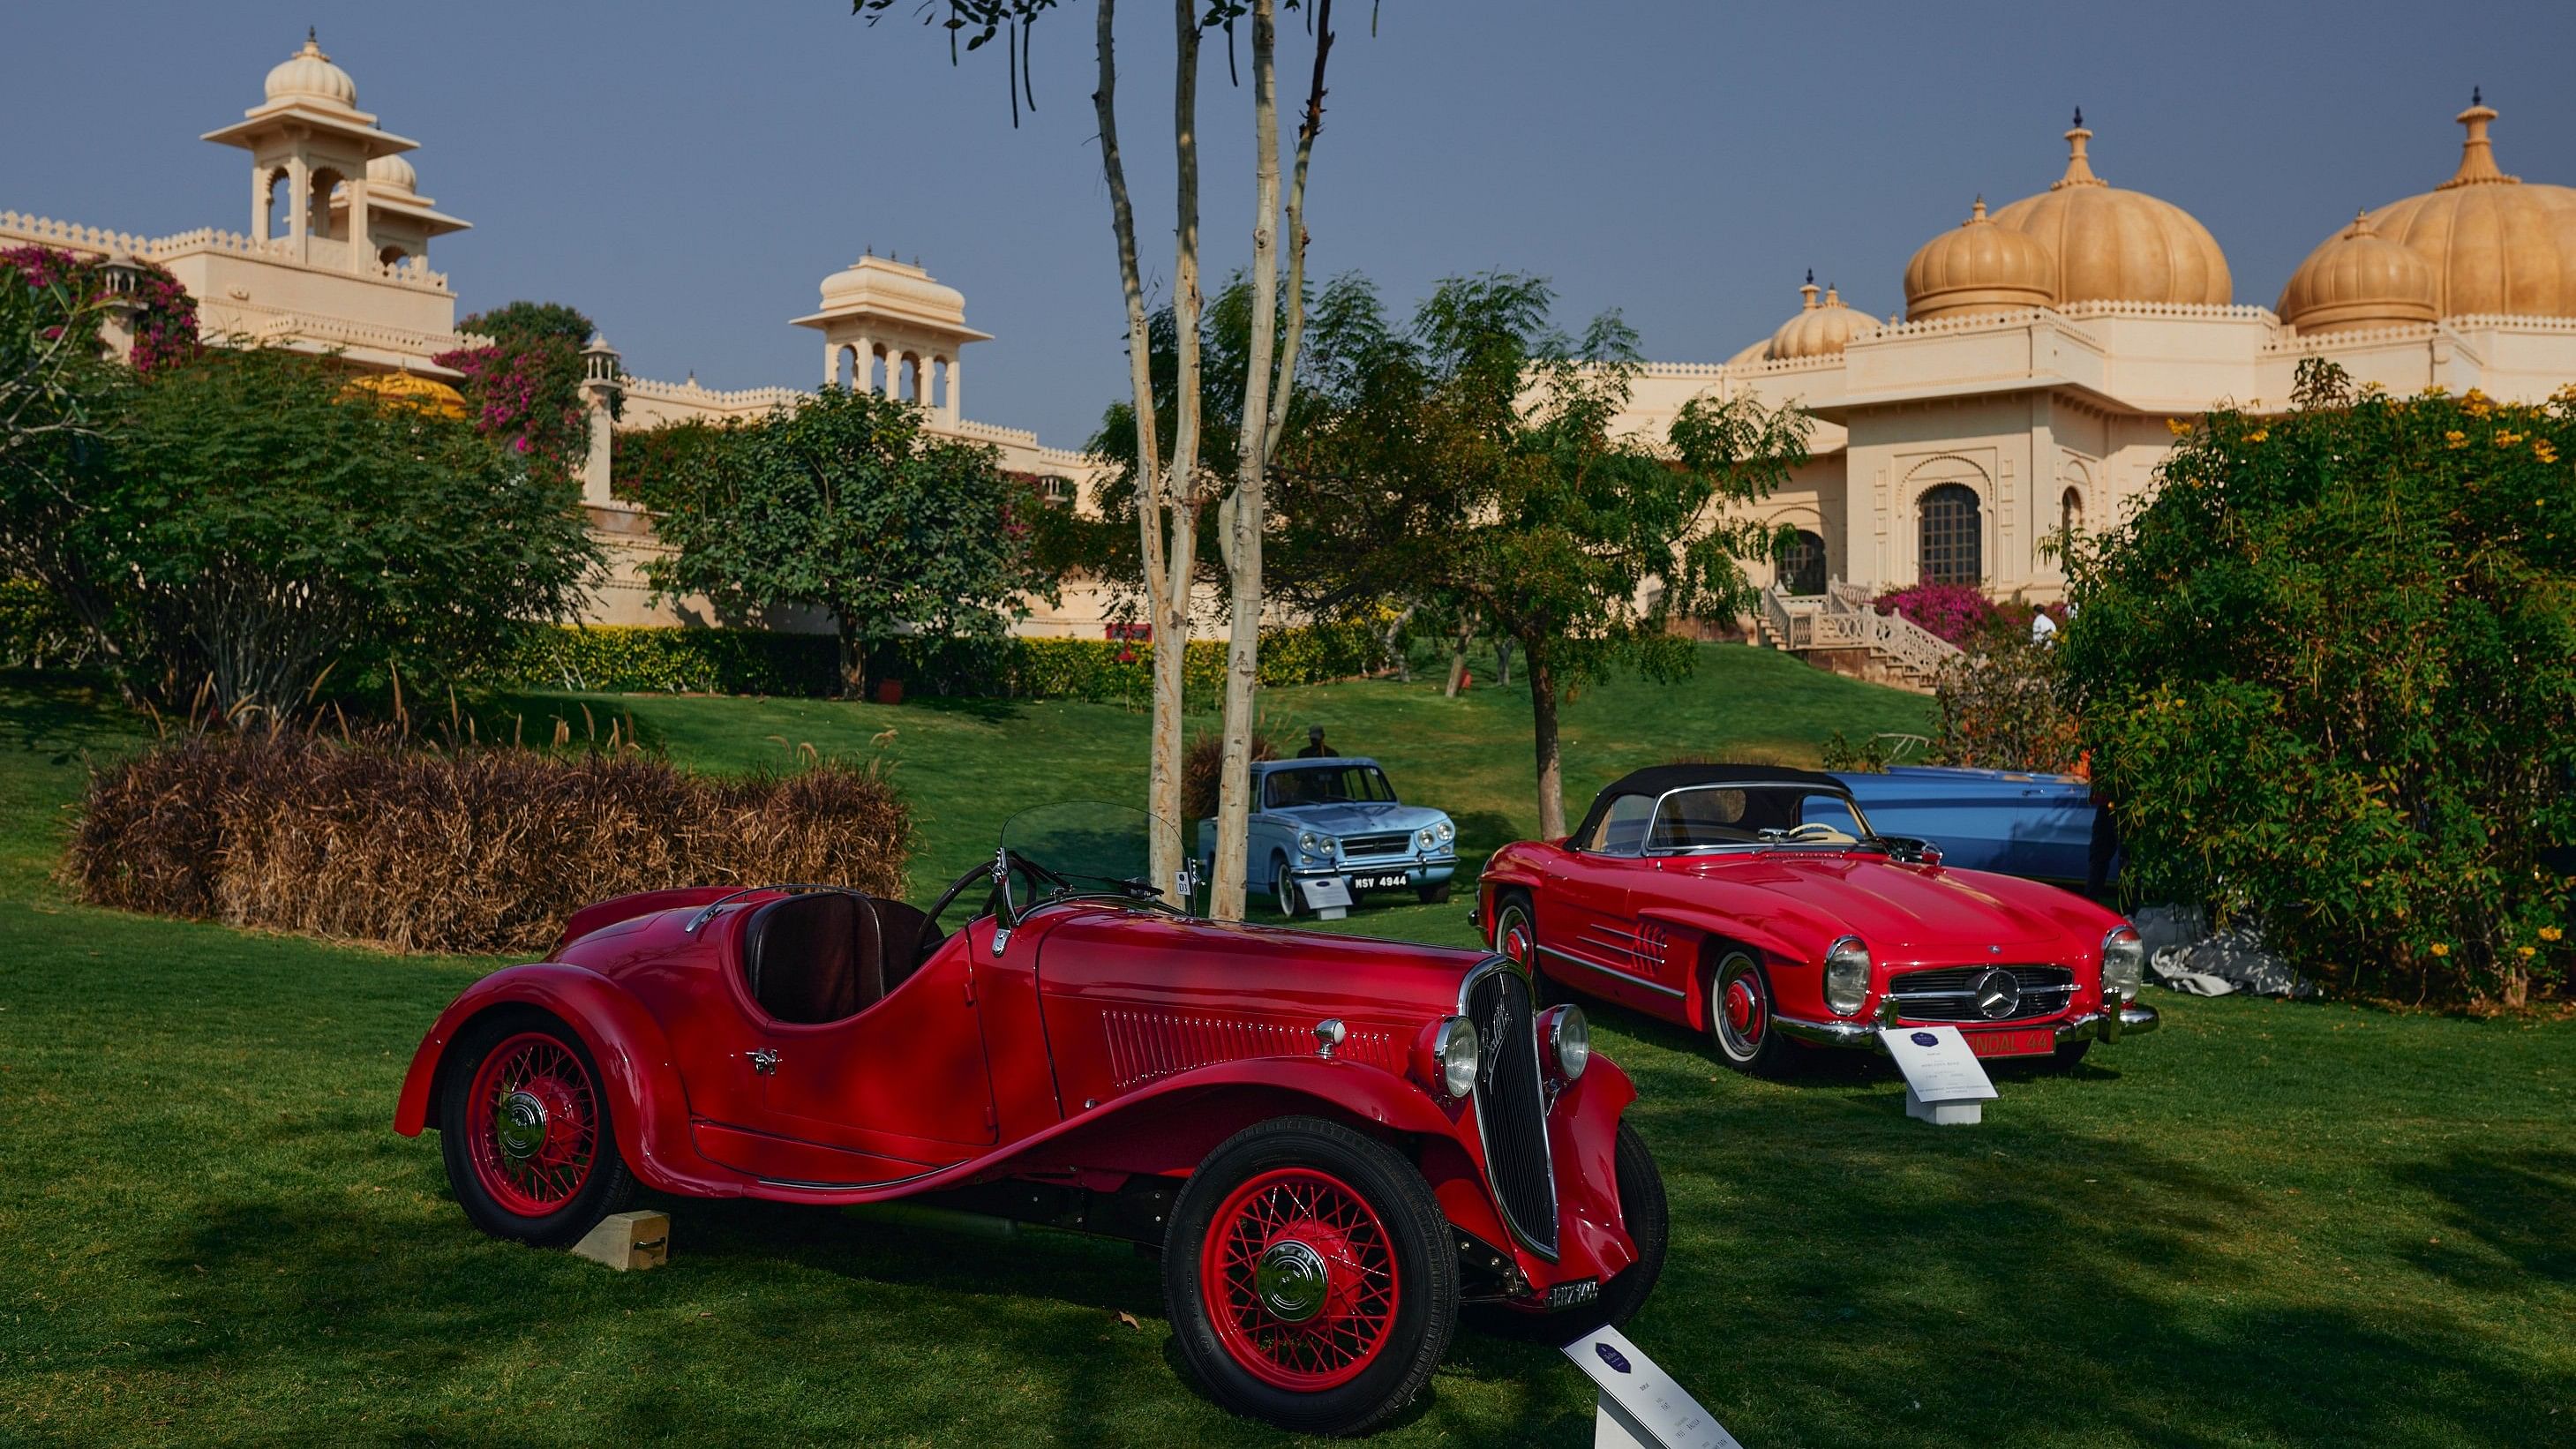 Vintage cars at the event